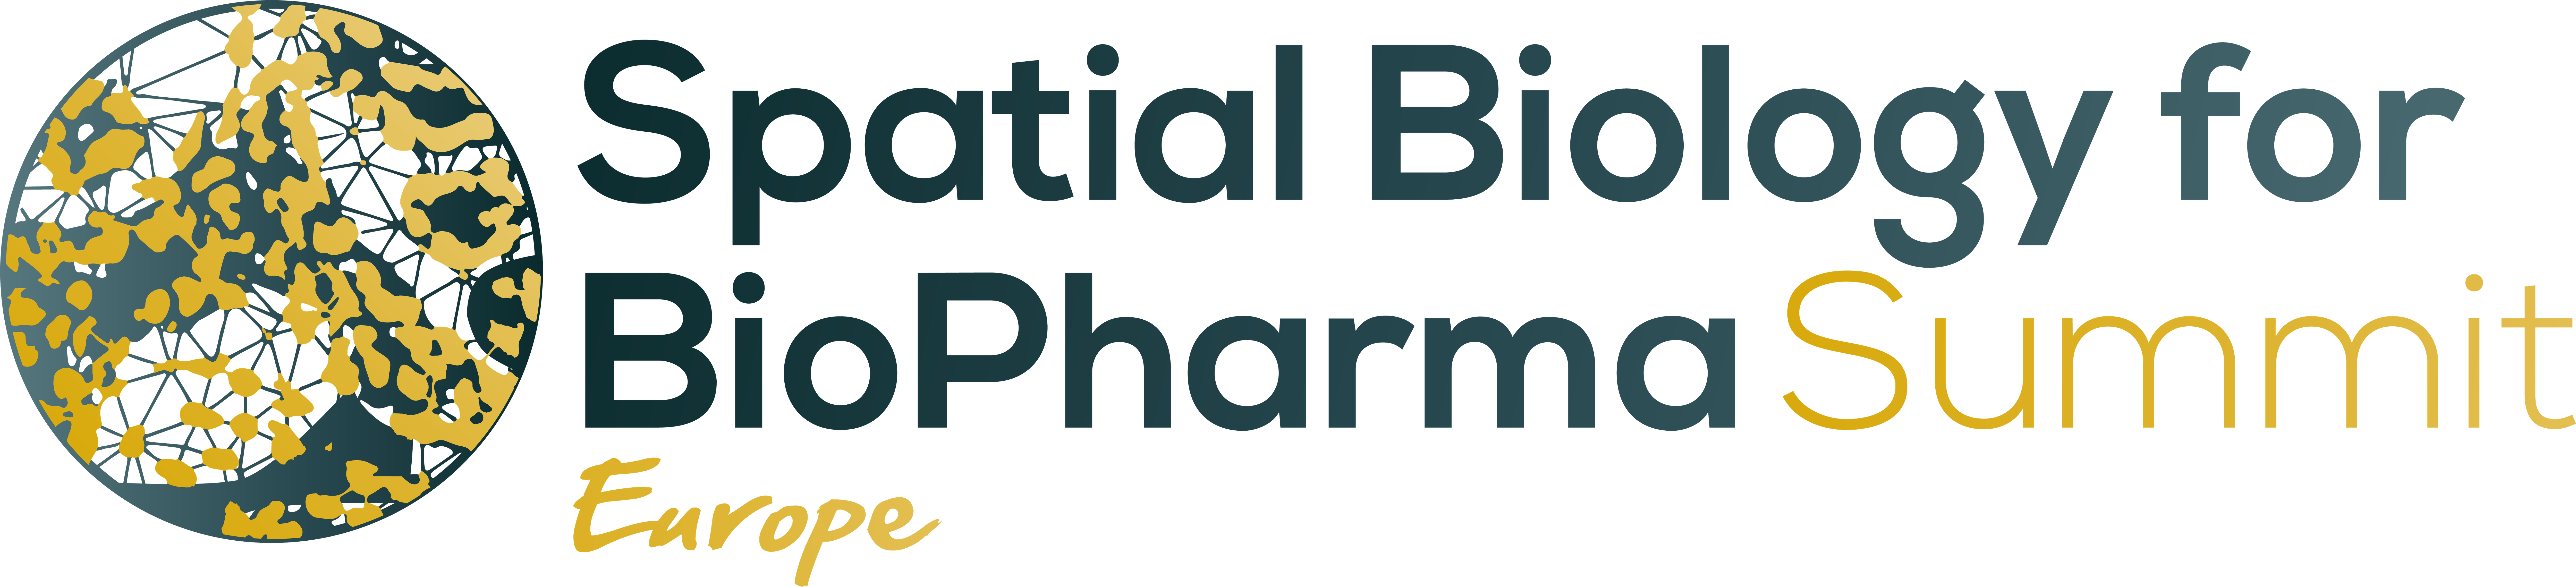 The next event in series is Spatial Biology for BioPharma Summit Europe